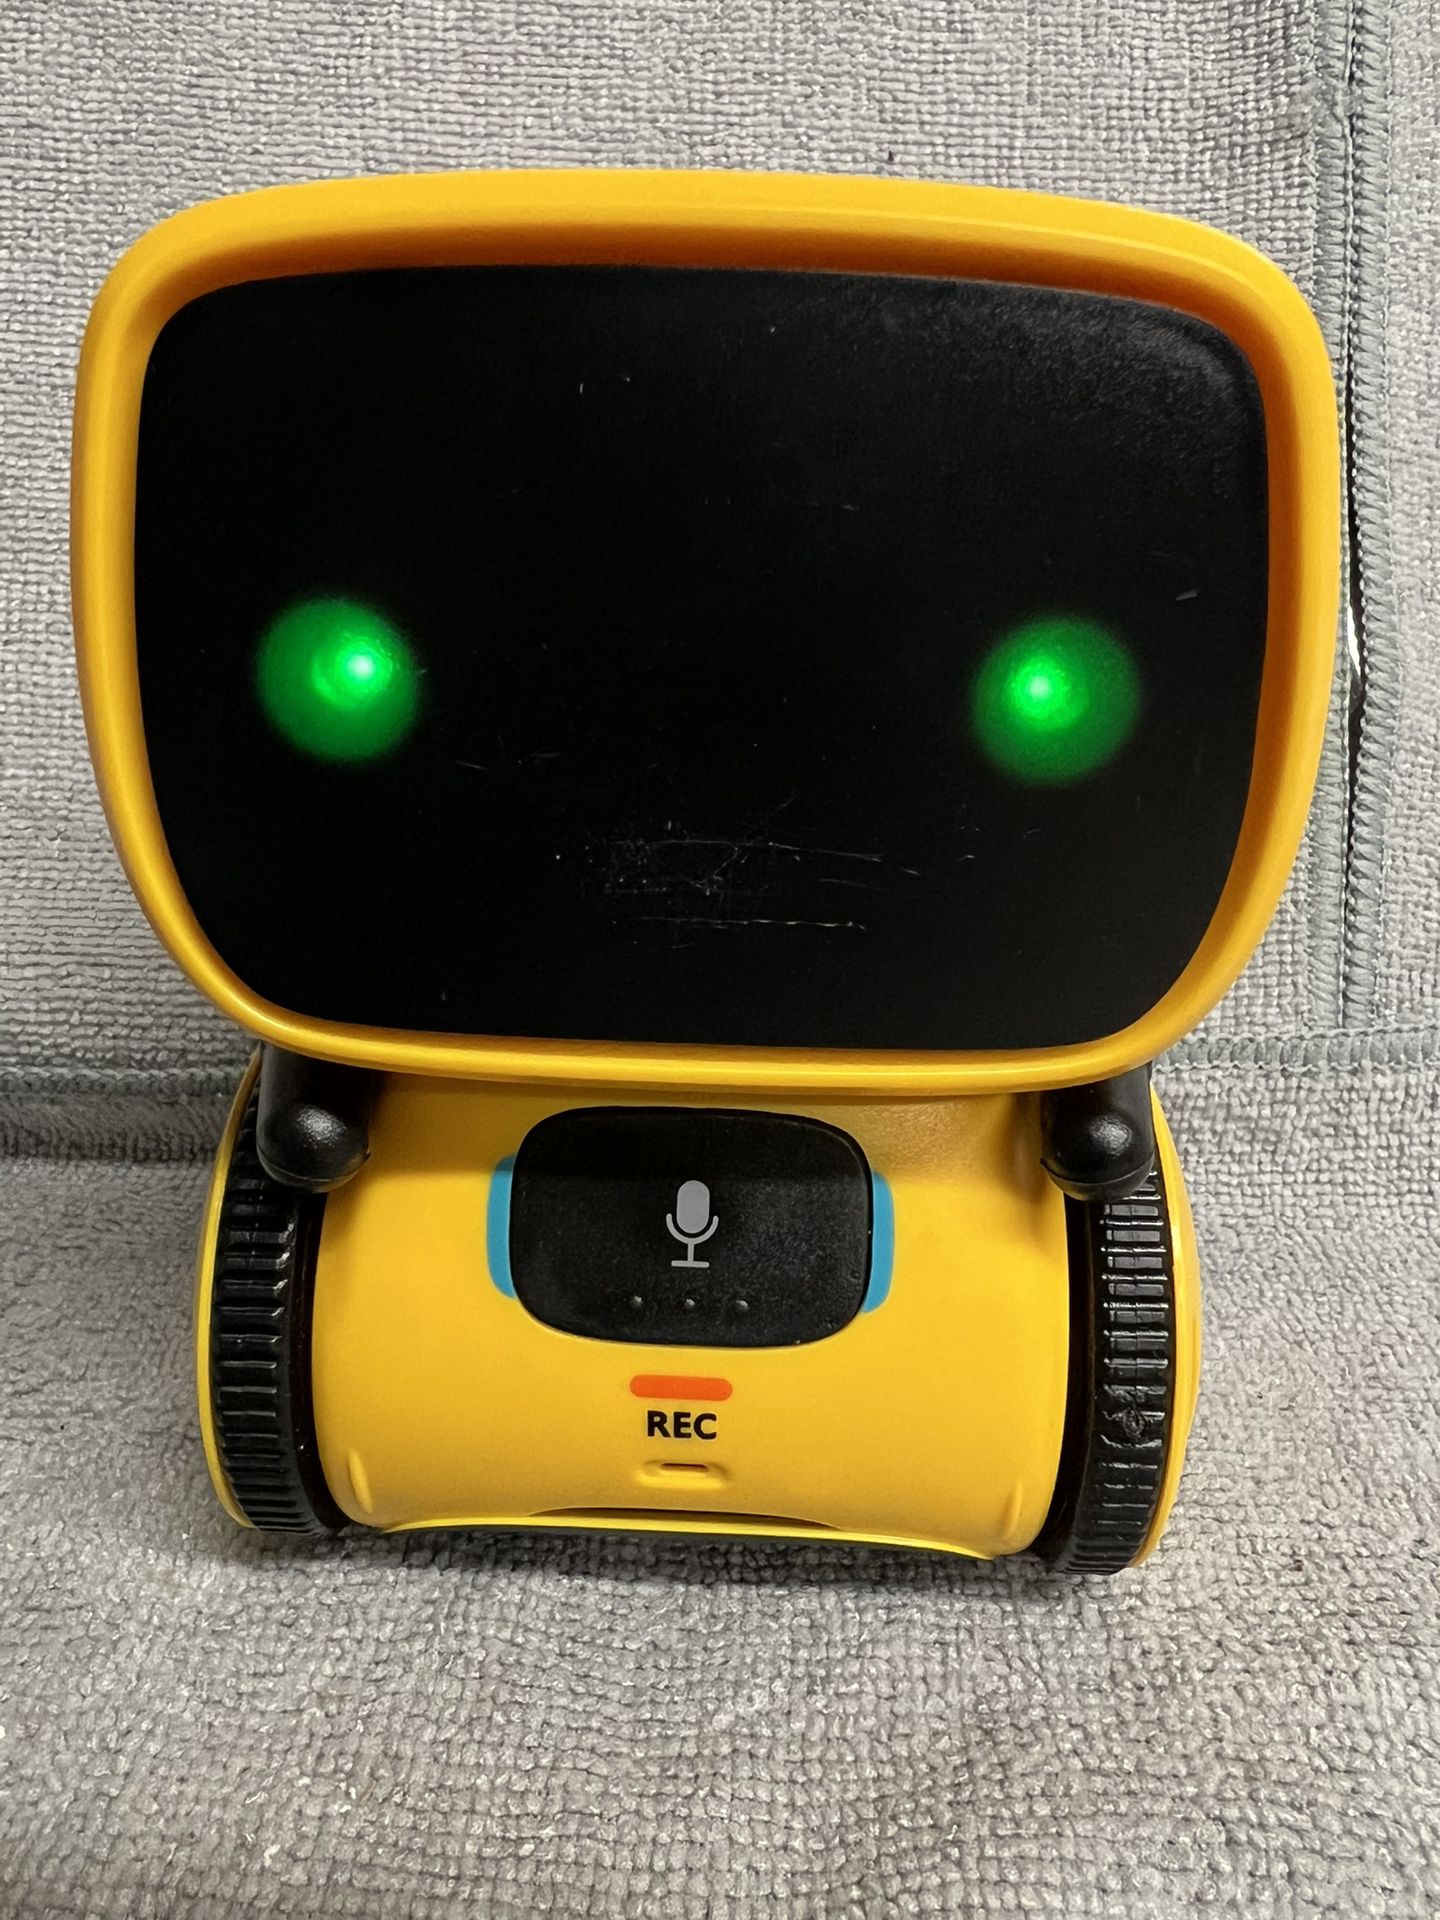 Voice Control AT-Robot Intelligent Interactive Smart Toy Robot For Kids - Yellow